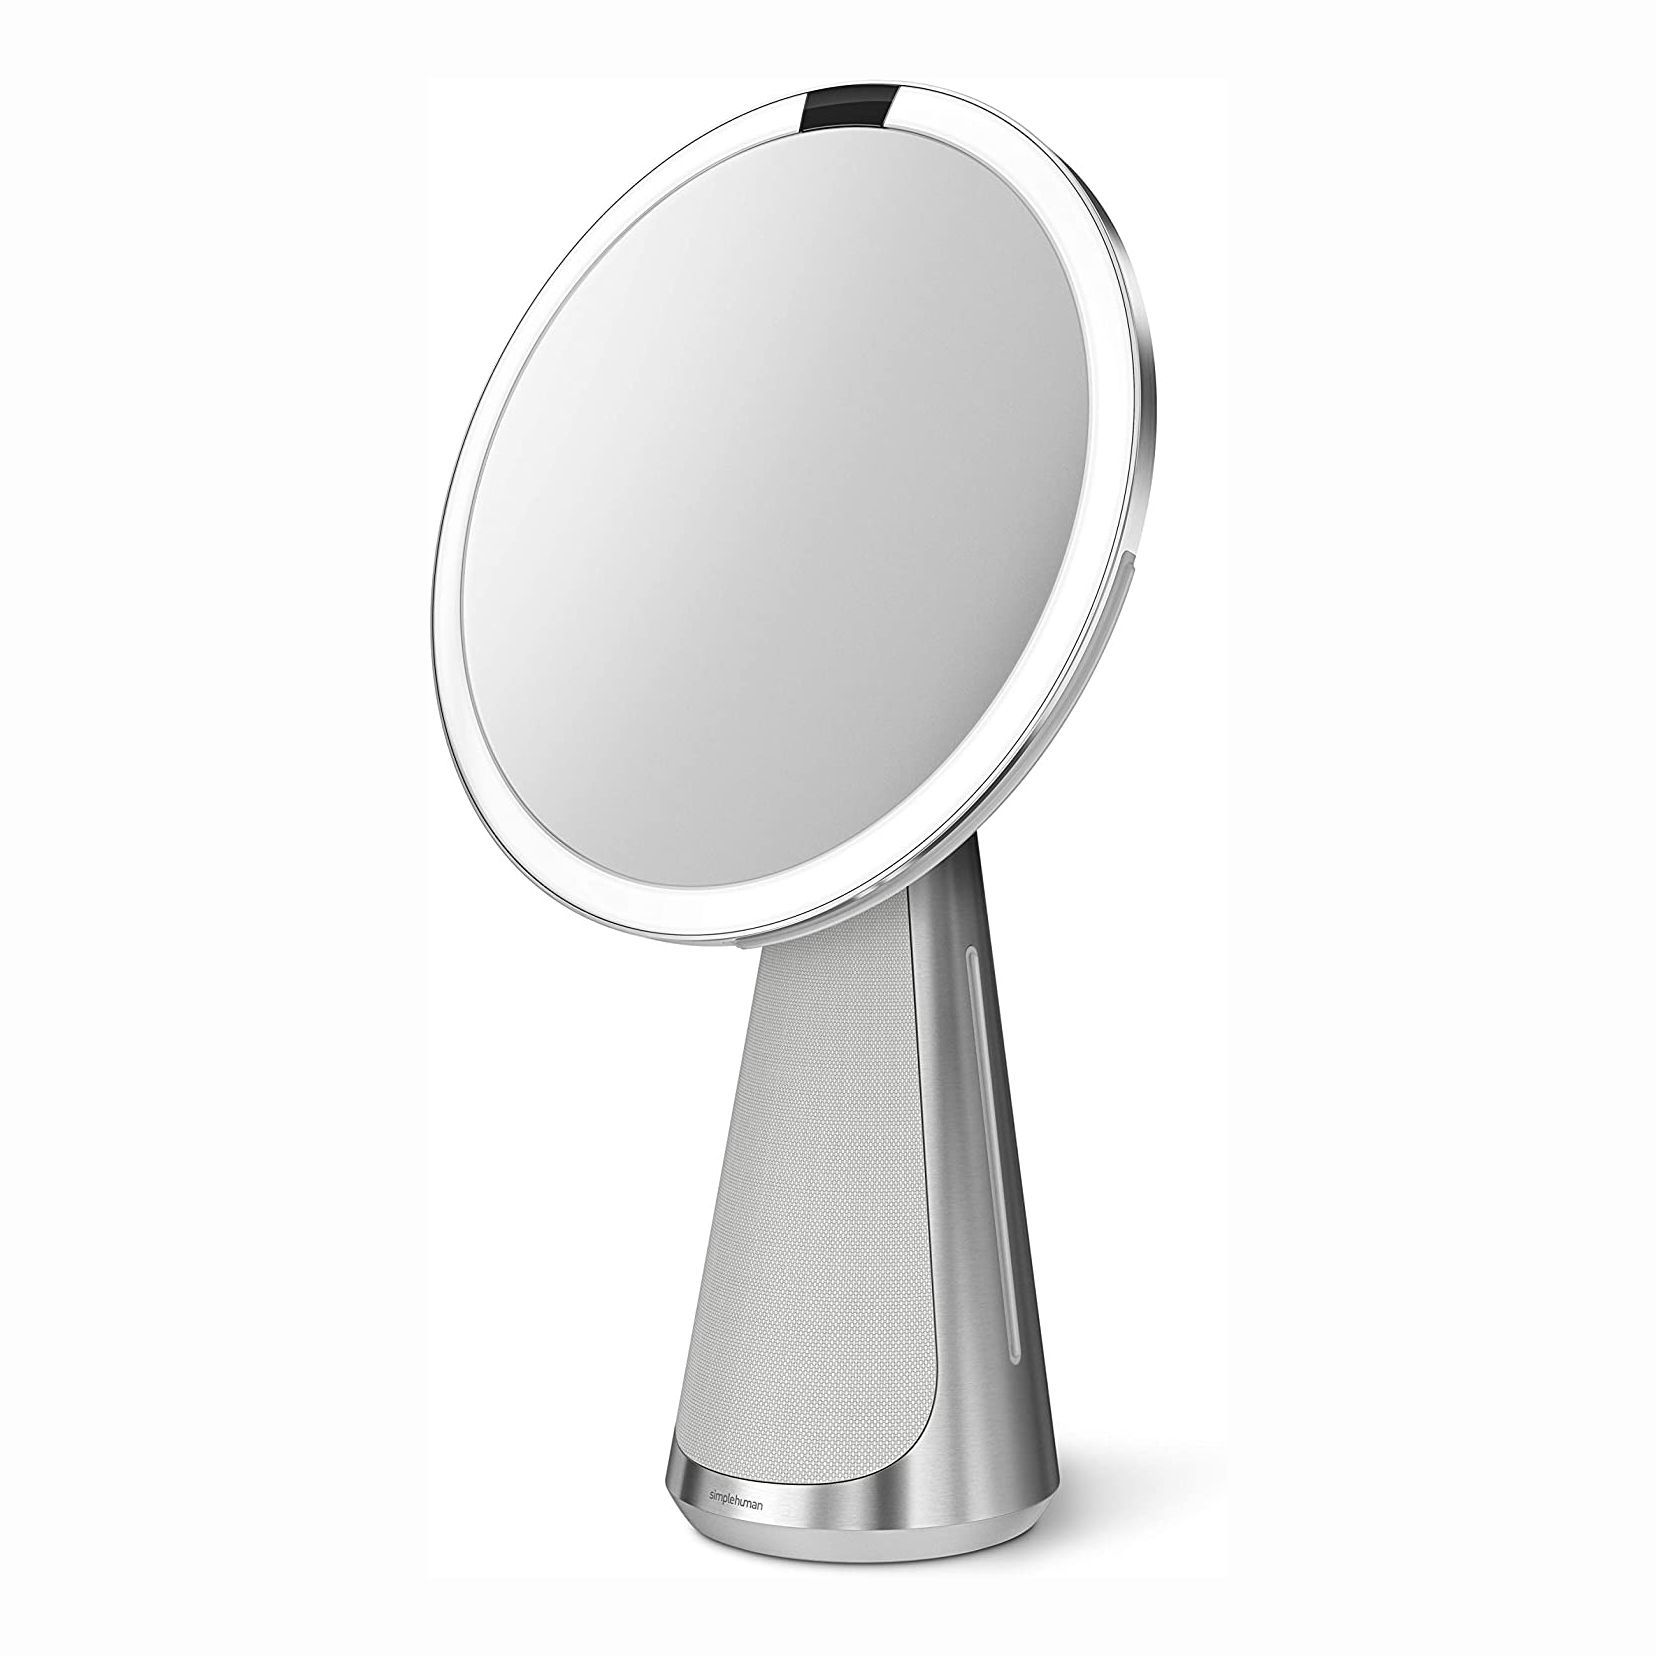 Dioche Table Makeup Mirror 6 inch Round Bathroom Vanity for Shaving/Makeup 360° Rotation LED Light Magnifying Mirror 